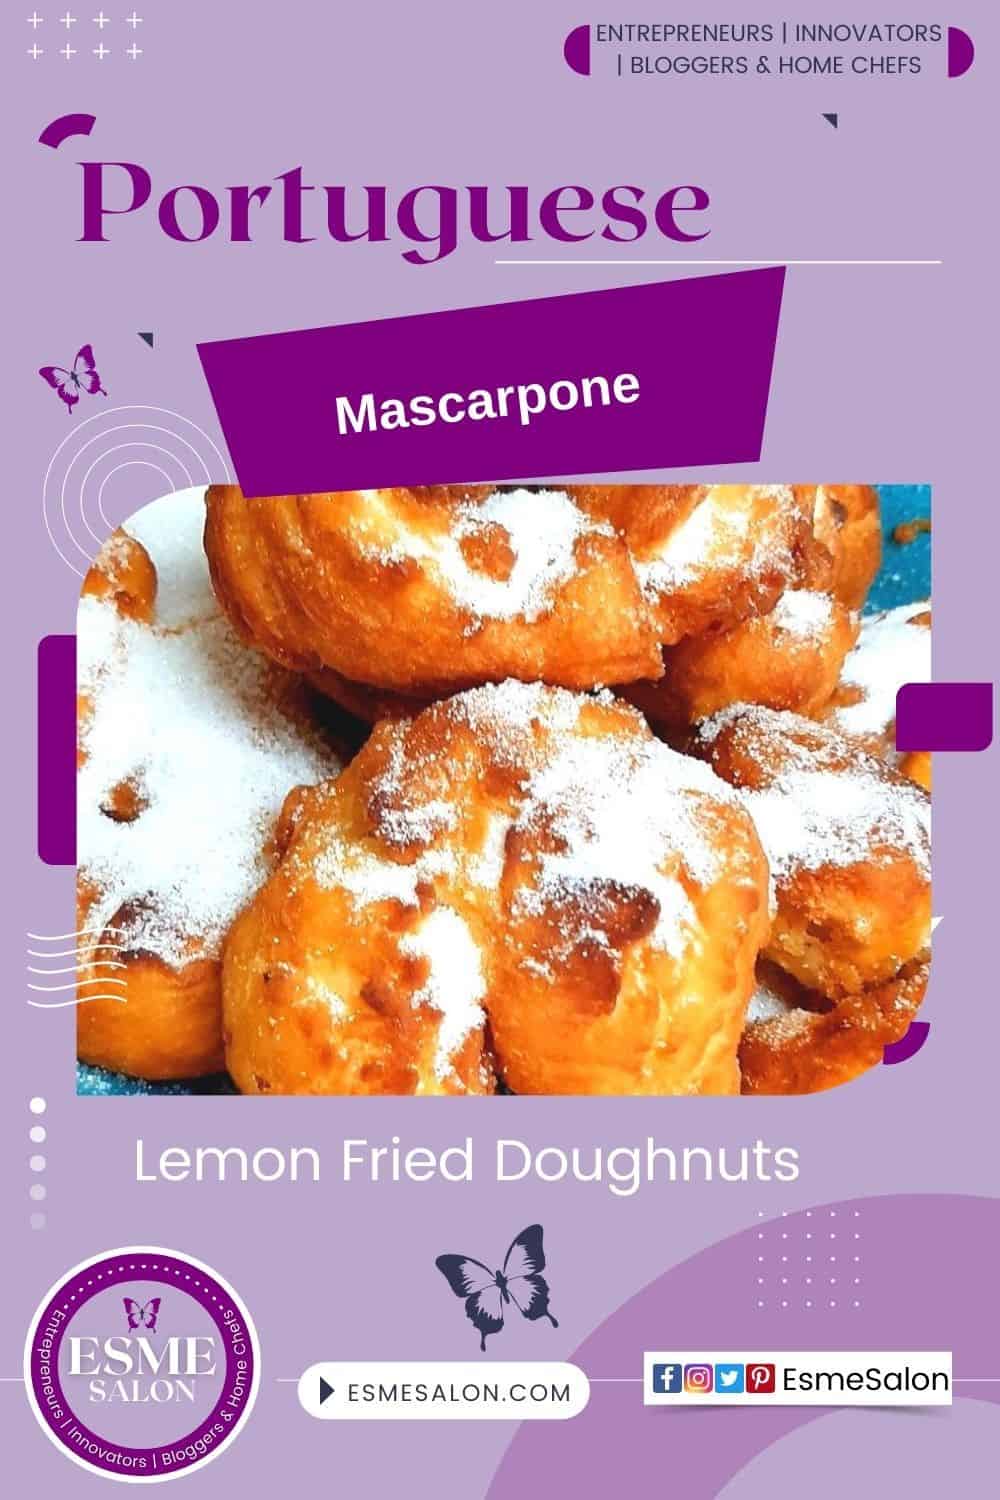 Lemon Fried Doughnuts with lots of sugar added to the top